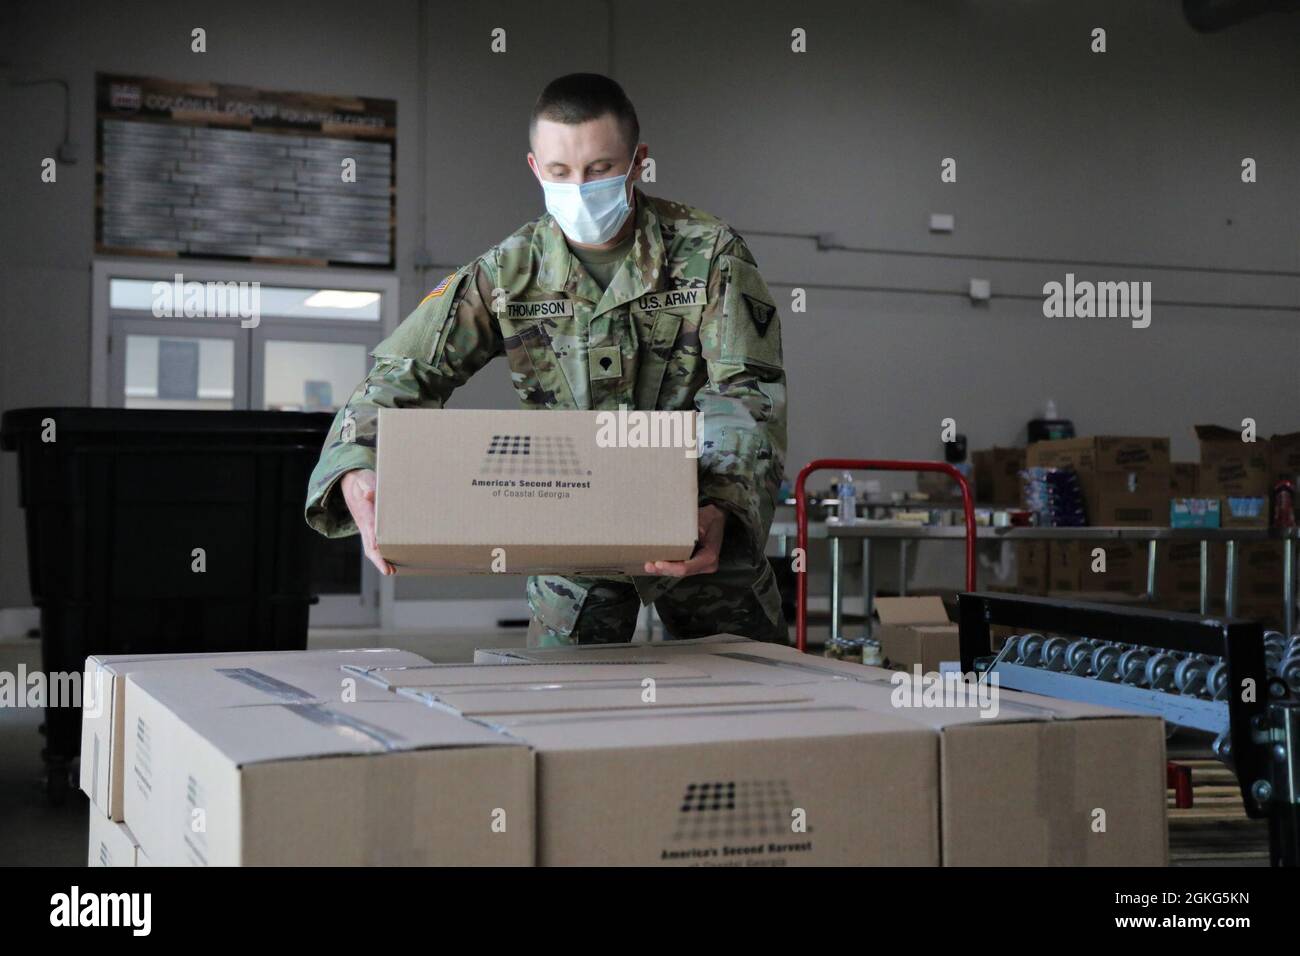 U.S. Army Spc. Jacob Thompson, a plumber with the Fort Stewart-based Land Dominance Center, 78th Troop Command, Georgia Army National Guard stacks a box of food April 14, 2021, at America’s Second Harvest of Coastal Georgia food bank in Savannah, Georgia. Georgia Guardsmen provided support to food banks across the state to help citizens in need during the COVID-19 pandemic. Stock Photo